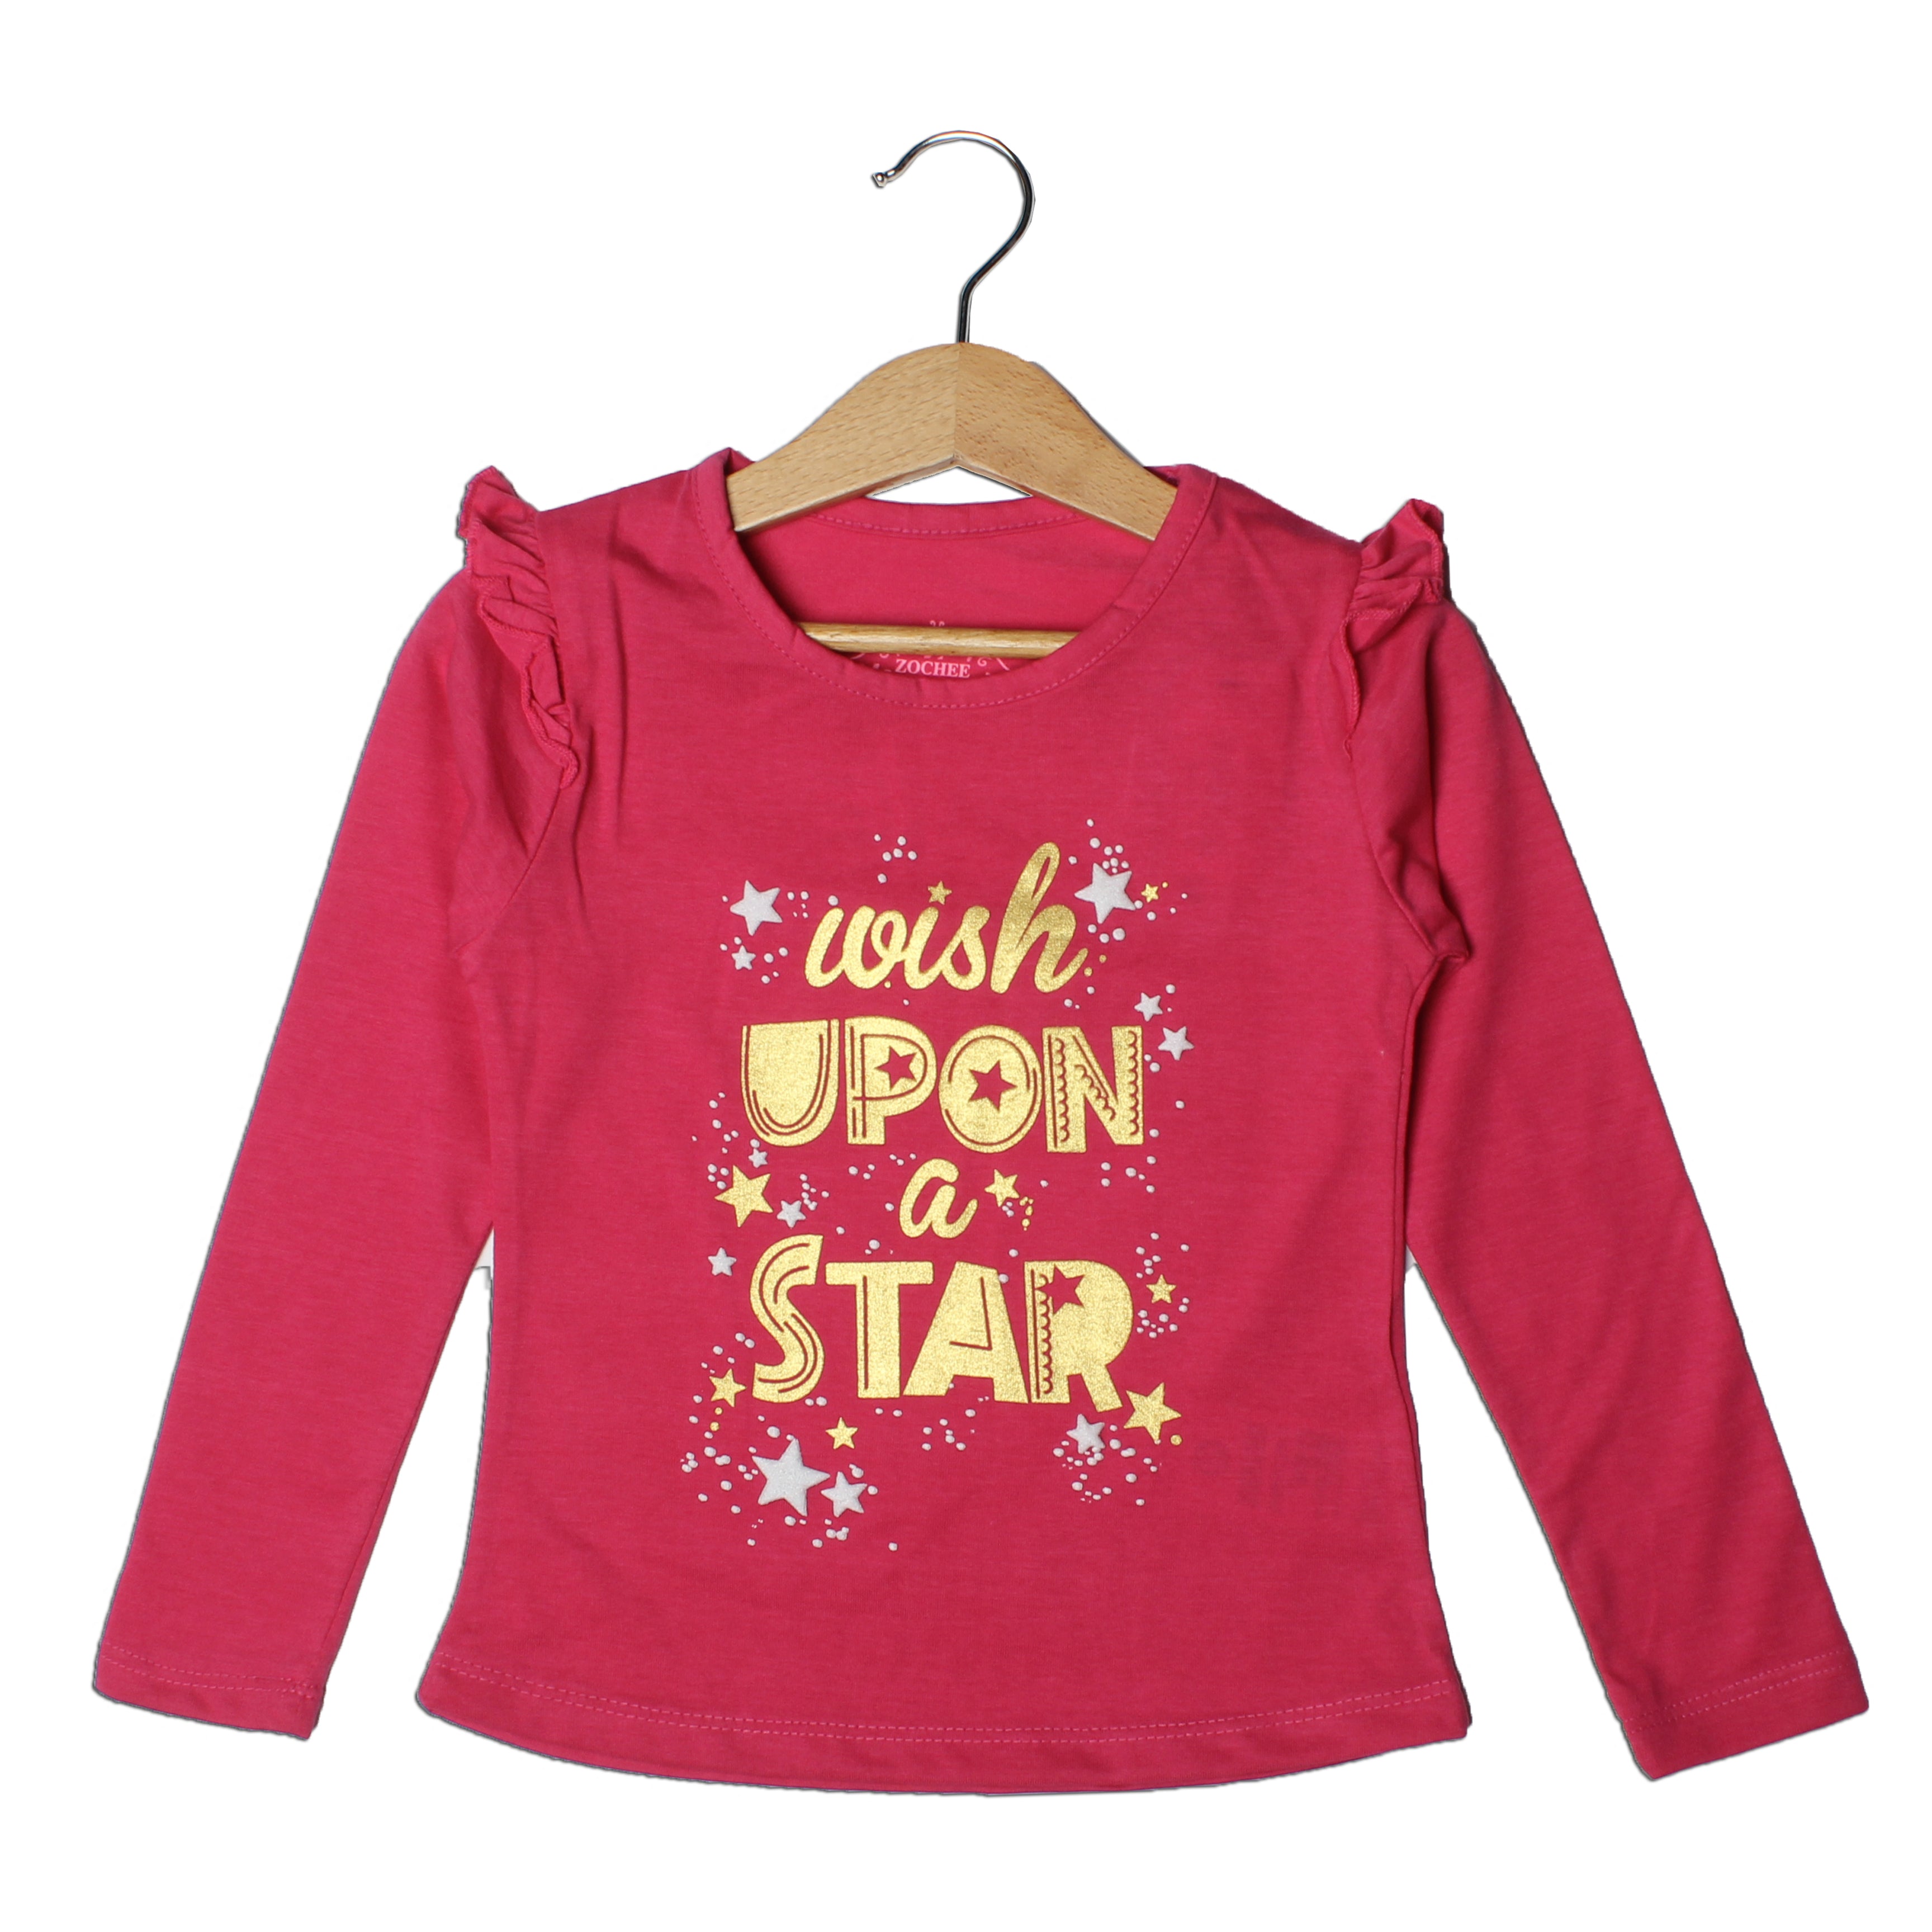 PINK FULL SLEEVES WHISH UP ON A STAR PRINTED TOP FOR GIRLS